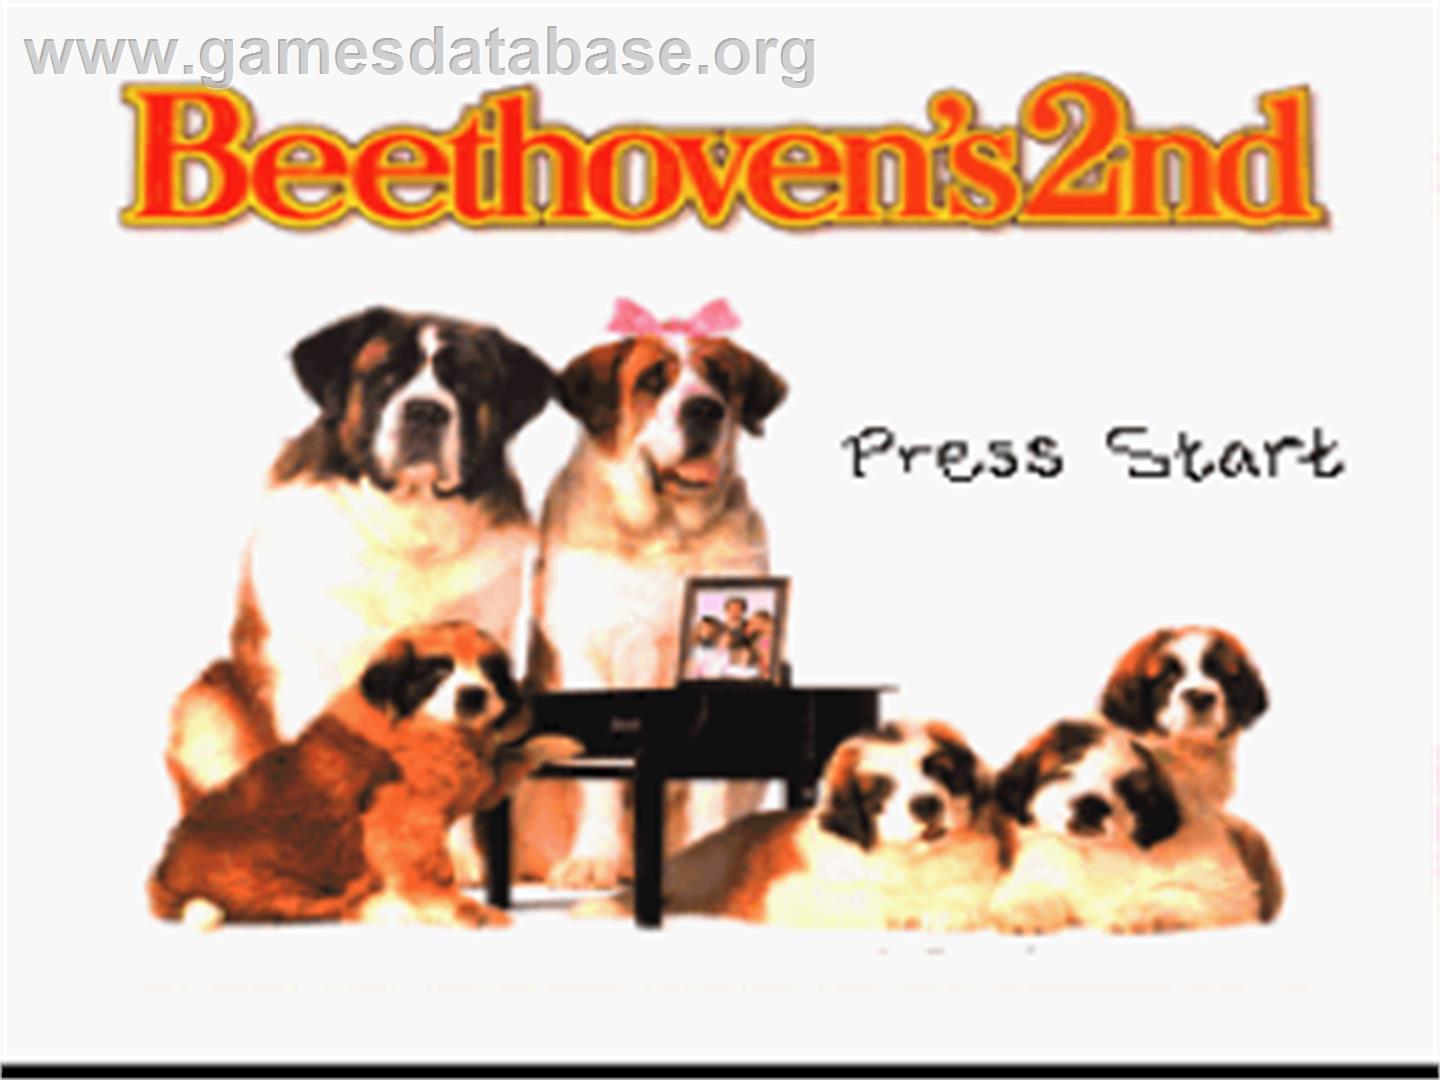 Beethoven's 2nd: The Ultimate Canine Caper! - Nintendo SNES - Artwork - Title Screen